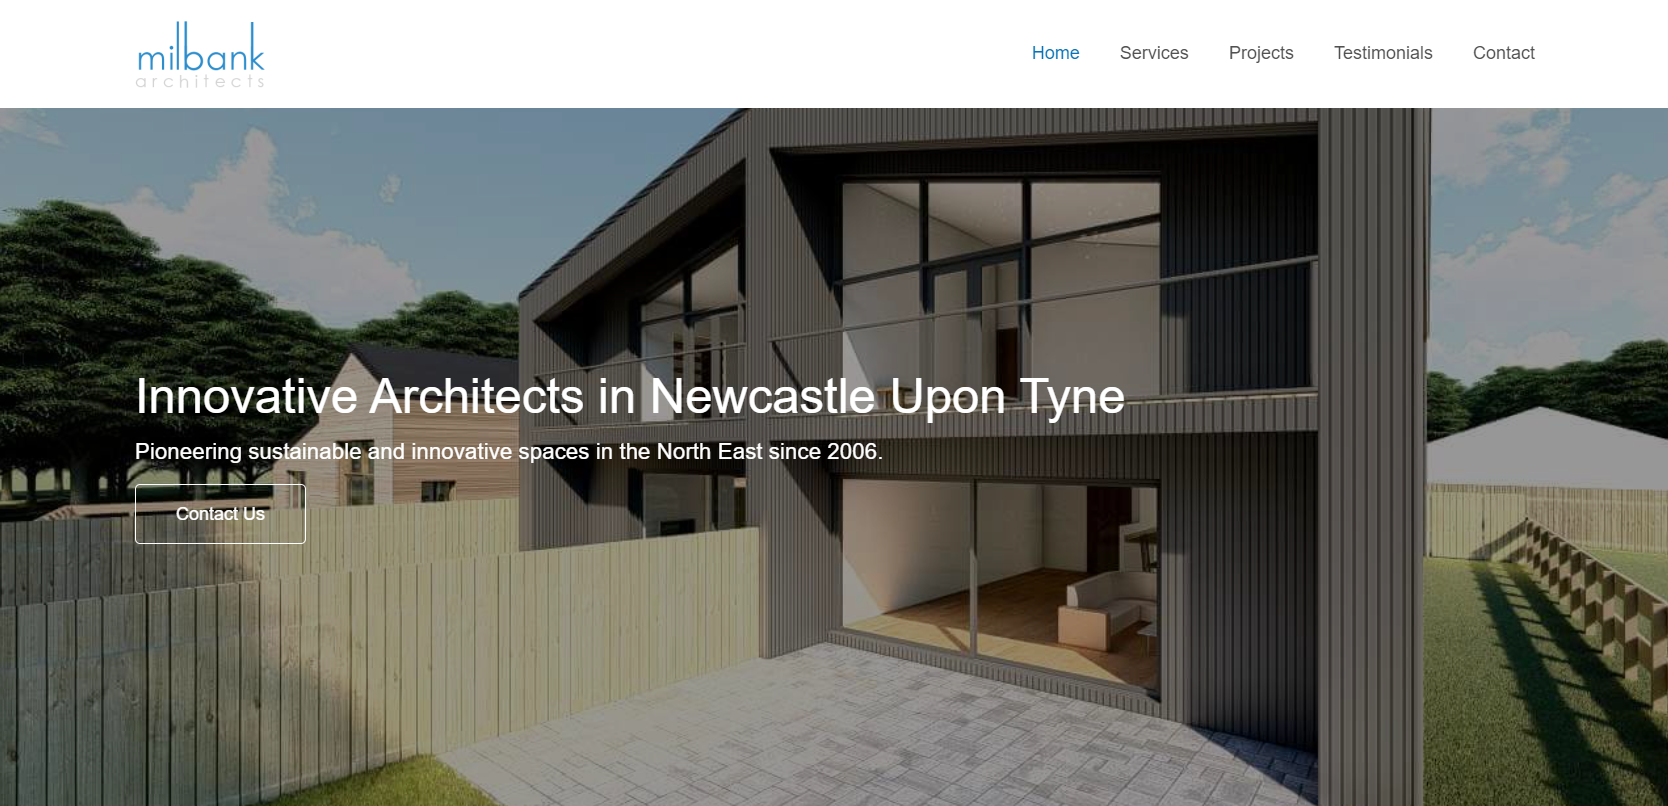 Milbank Architects Homepage